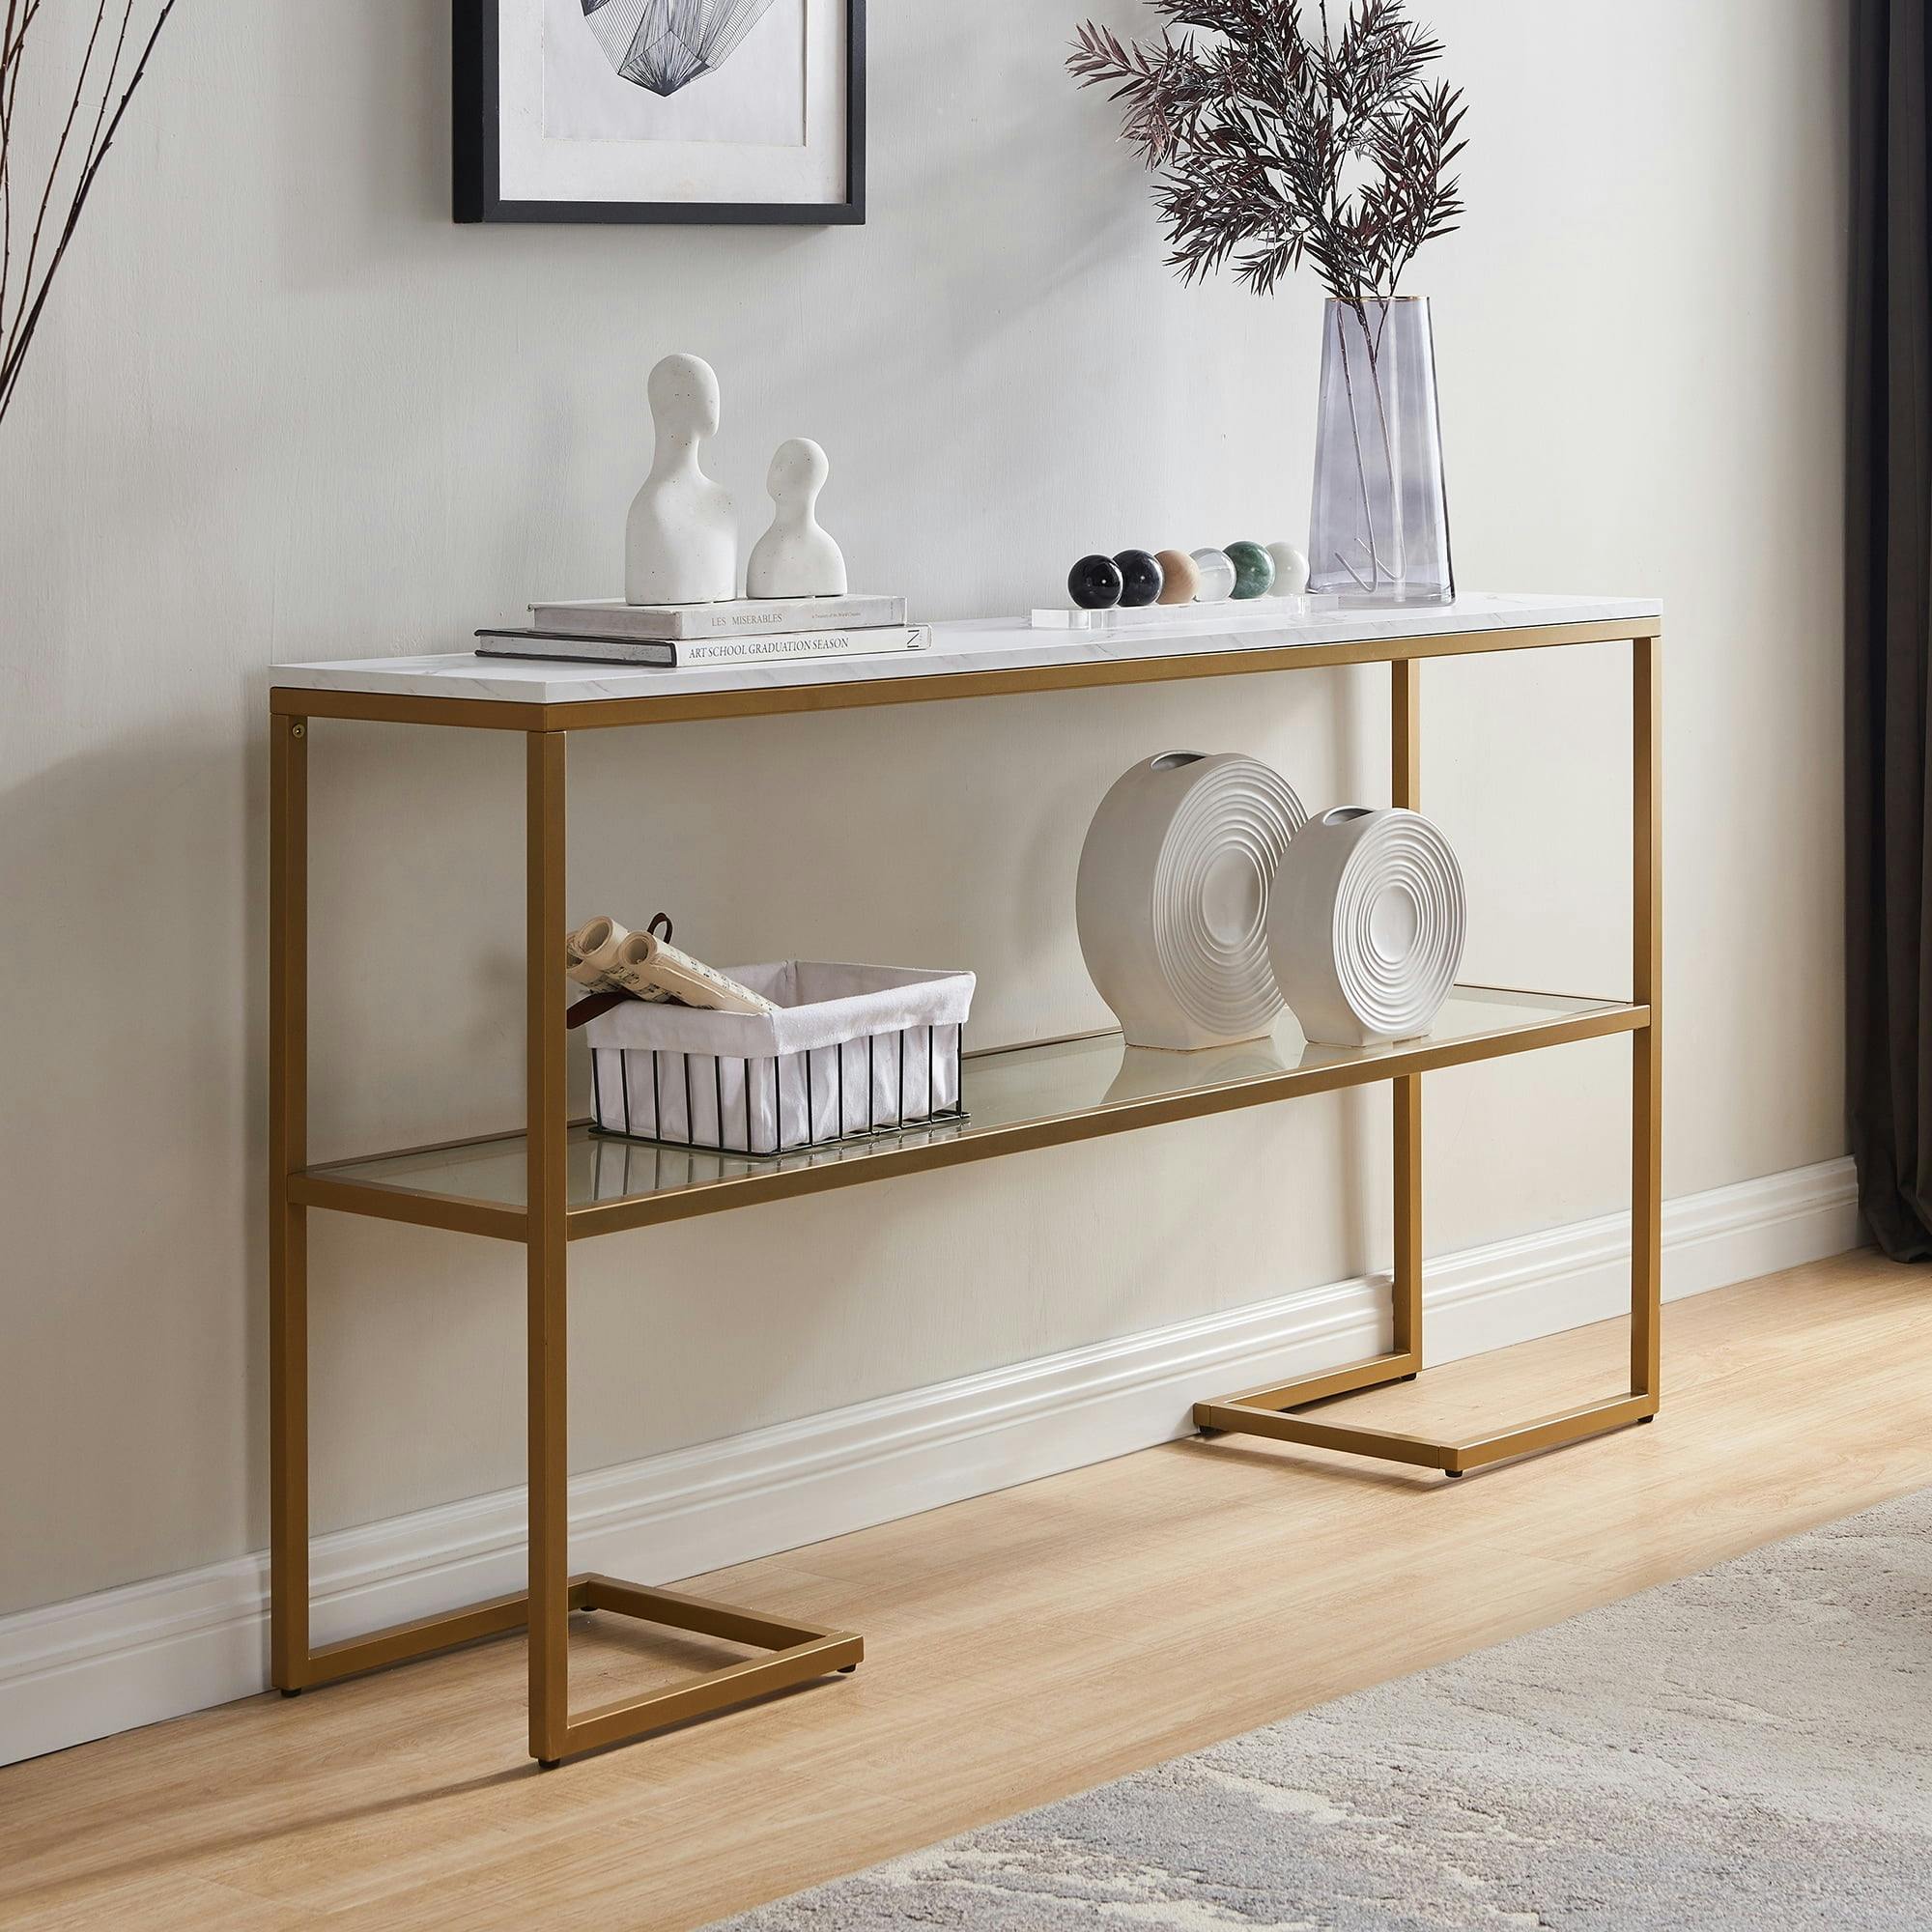 Errol 55" Gold Rectangular Console Table with Faux Marble and Glass Shelf